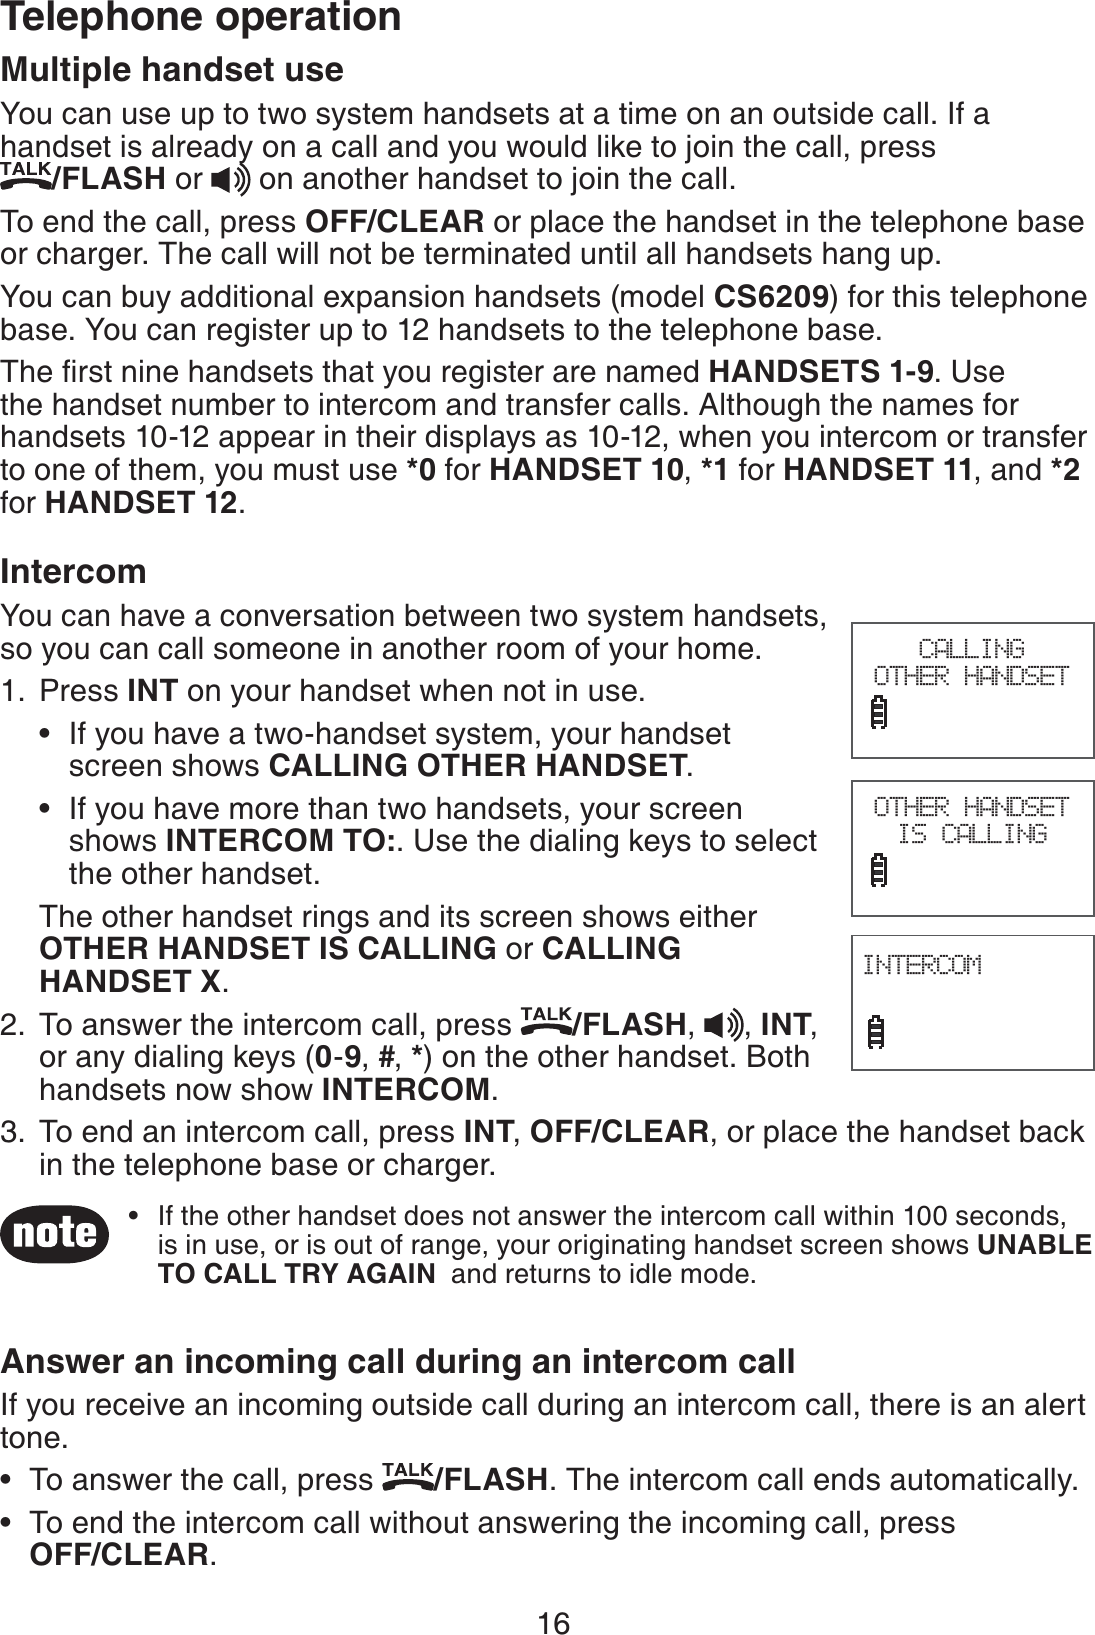 16Telephone operationMultiple handset useYou can use up to two system handsets at a time on an outside call. If a handset is already on a call and you would like to join the call, press    /FLASH or   on another handset to join the call.To end the call, press OFF/CLEAR or place the handset in the telephone base or charger. The call will not be terminated until all handsets hang up.You can buy additional expansion handsets (model CS6209) for this telephone base. You can register up to 12 handsets to the telephone base.The first nine handsets that you register are named HANDSETS 1-9. Use the handset number to intercom and transfer calls. Although the names for handsets 10-12 appear in their displays as 10-12, when you intercom or transfer to one of them, you must use *0 for HANDSET 10, *1 for HANDSET 11, and *2 for HANDSET 12.IntercomYou can have a conversation between two system handsets, so you can call someone in another room of your home.Press INT on your handset when not in use.If you have a two-handset system, your handset    screen shows CALLING OTHER HANDSET.If you have more than two handsets, your screen   shows INTERCOM TO:. Use the dialing keys to select      the other handset.The other handset rings and its screen shows either OTHER HANDSET IS CALLING or CALLING HANDSET X.To answer the intercom call, press  /FLASH,  , INT, or any dialing keys (0-9, #, *) on the other handset. Both handsets now show INTERCOM.To end an intercom call, press INT, OFF/CLEAR, or place the handset back in the telephone base or charger.Answer an incoming call during an intercom callIf you receive an incoming outside call during an intercom call, there is an alert tone.To answer the call, press  /FLASH. The intercom call ends automatically.To end the intercom call without answering the incoming call, press    OFF/CLEAR.1.••2.3.••If the other handset does not answer the intercom call within 100 seconds, is in use, or is out of range, your originating handset screen shows UNABLE TO CALL TRY AGAIN  and returns to idle mode.•OTHER HANDSET IS CALLINGINTERCOM                             CALLING OTHER HANDSET